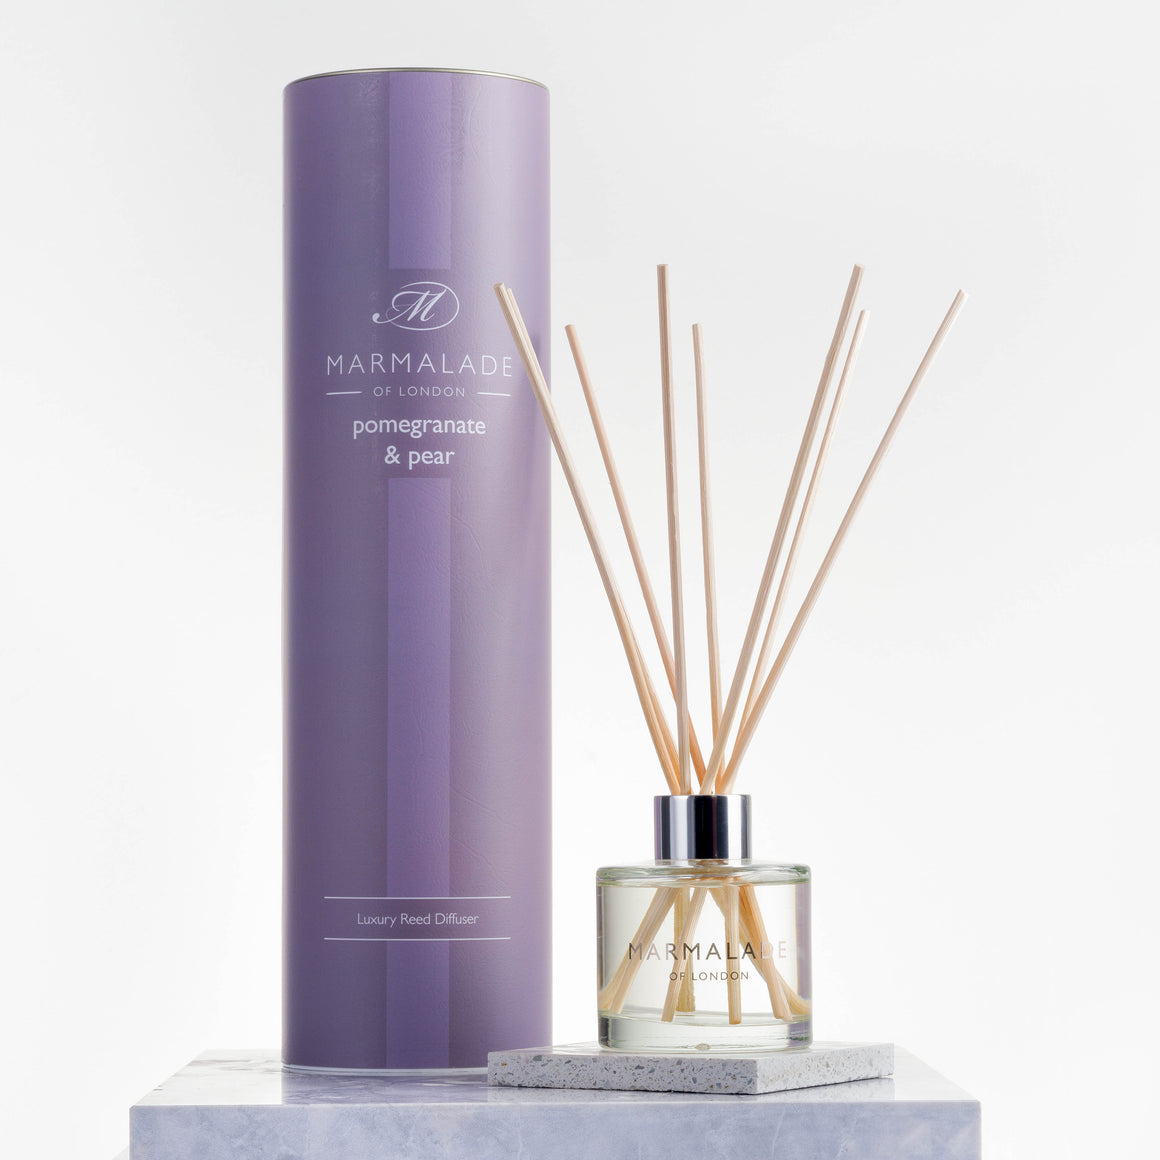 Marmalade of London Pomegranate & Pear Reed Diffuser with purple packaging